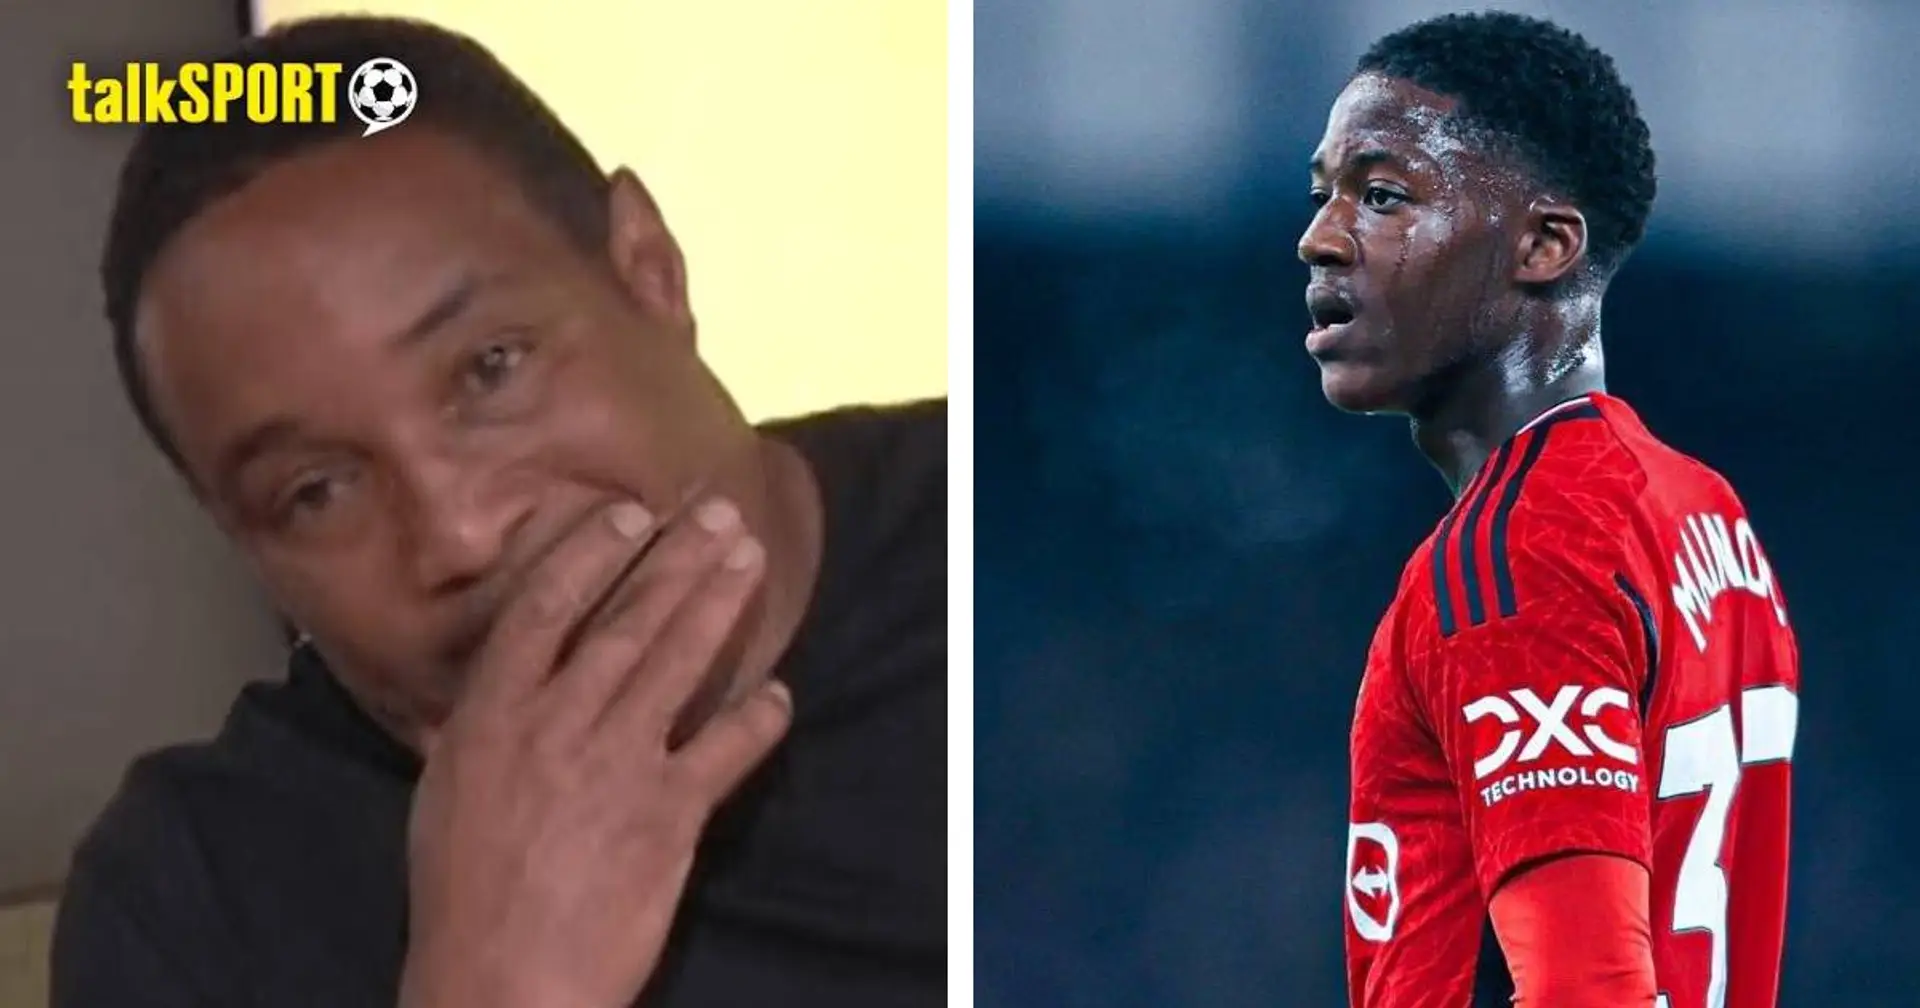 'He's okay. Let's not get carried away': Paul Ince issues Kobbie Mainoo reality check